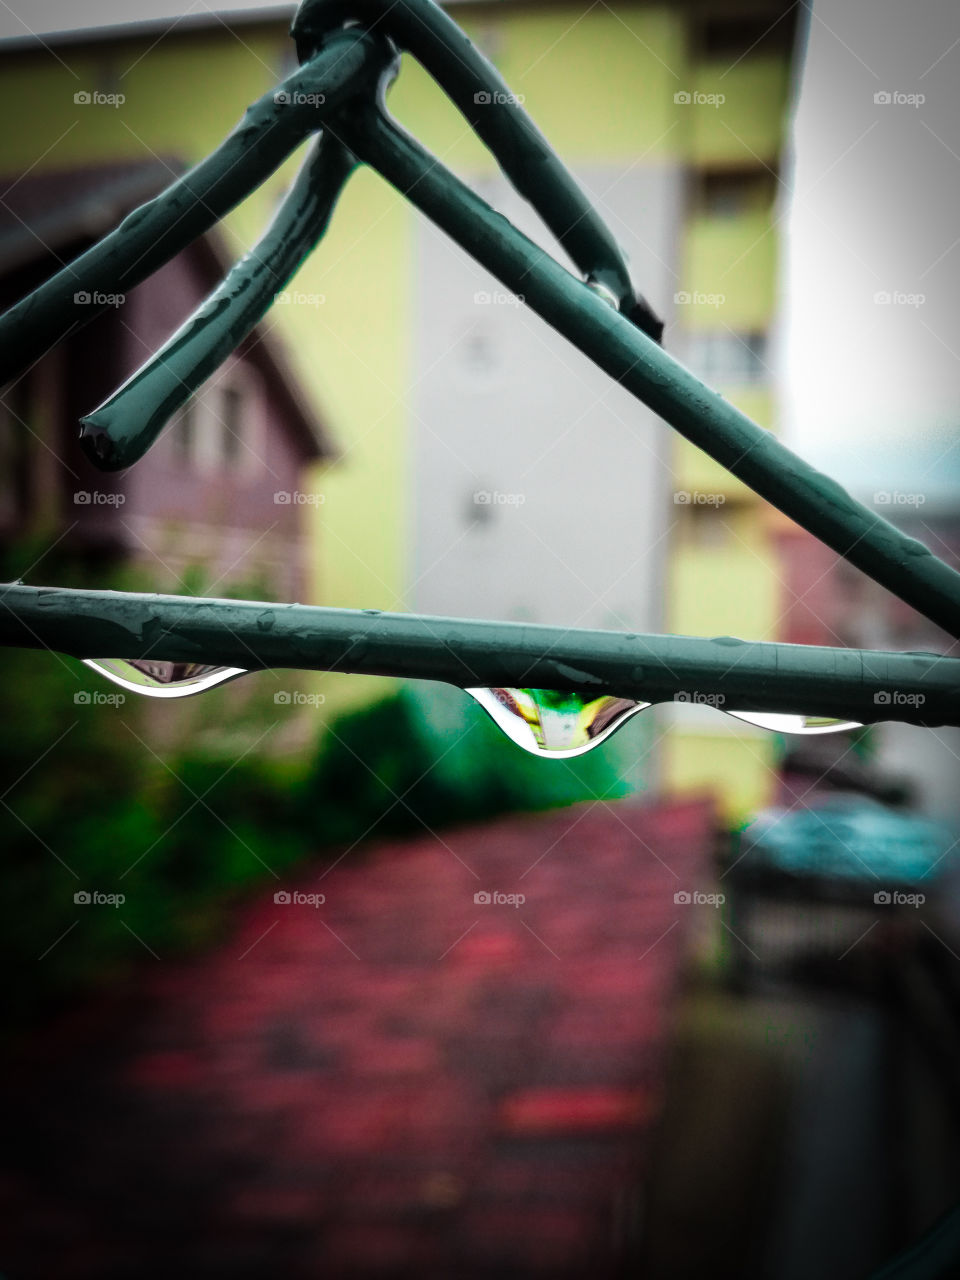 Raindrop on a green string